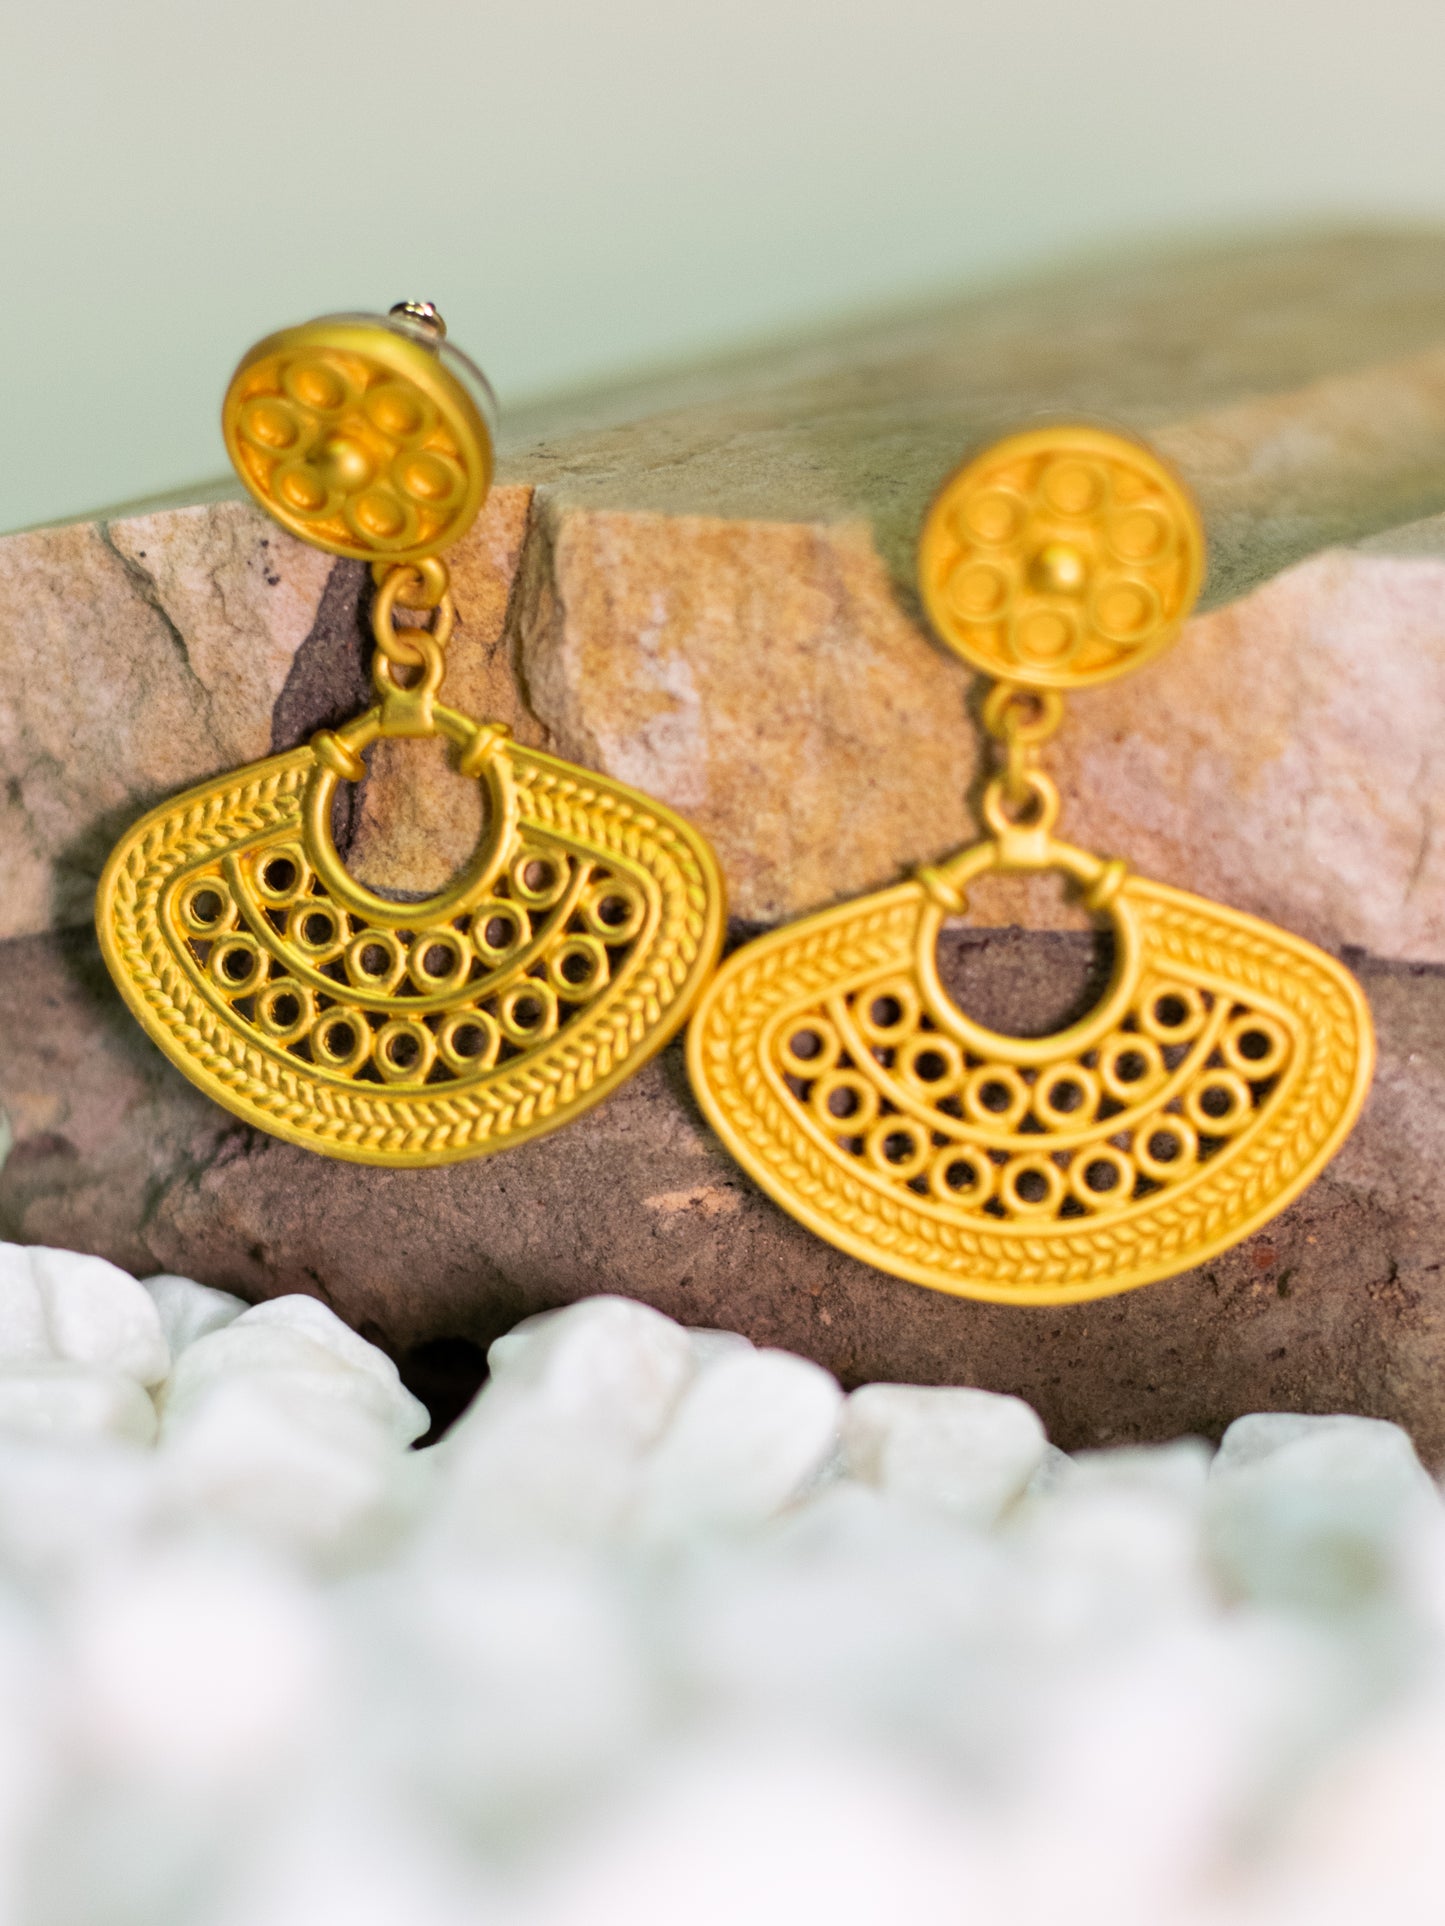 24K Gold Plated Pre-Columbian Muisca Nariguera Earrings.